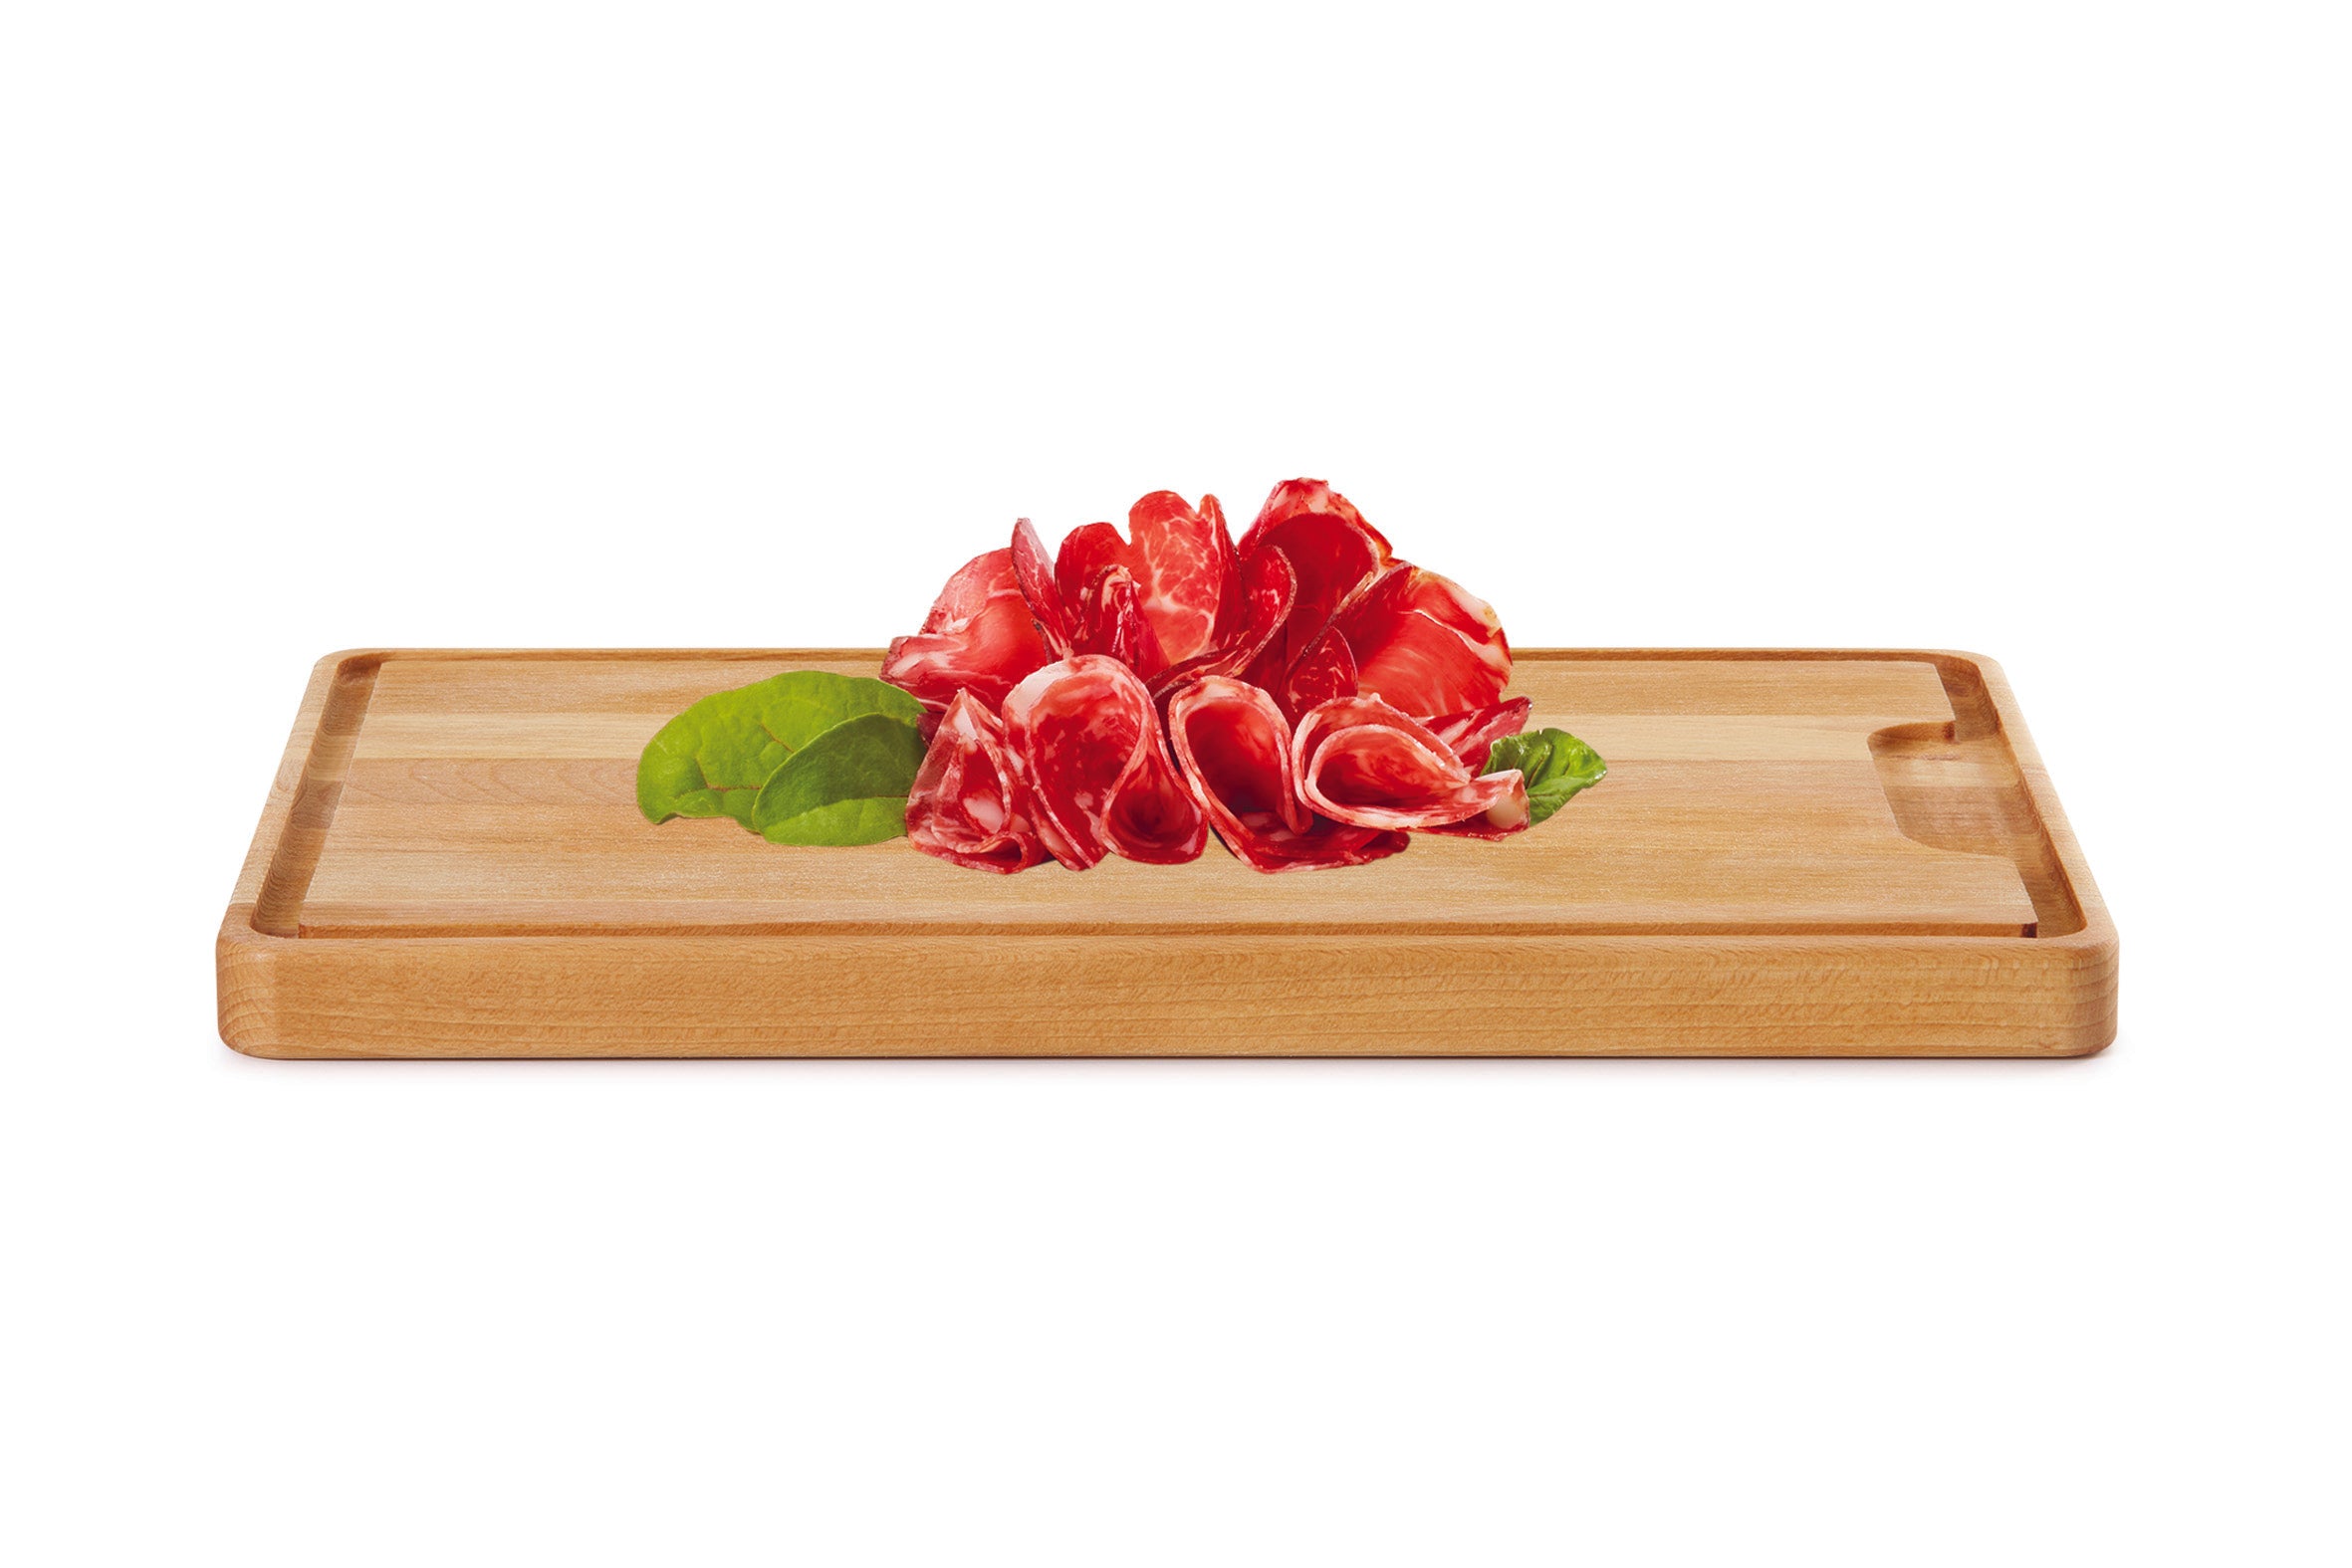 Metaltex Wooden Cutting Board, Carded